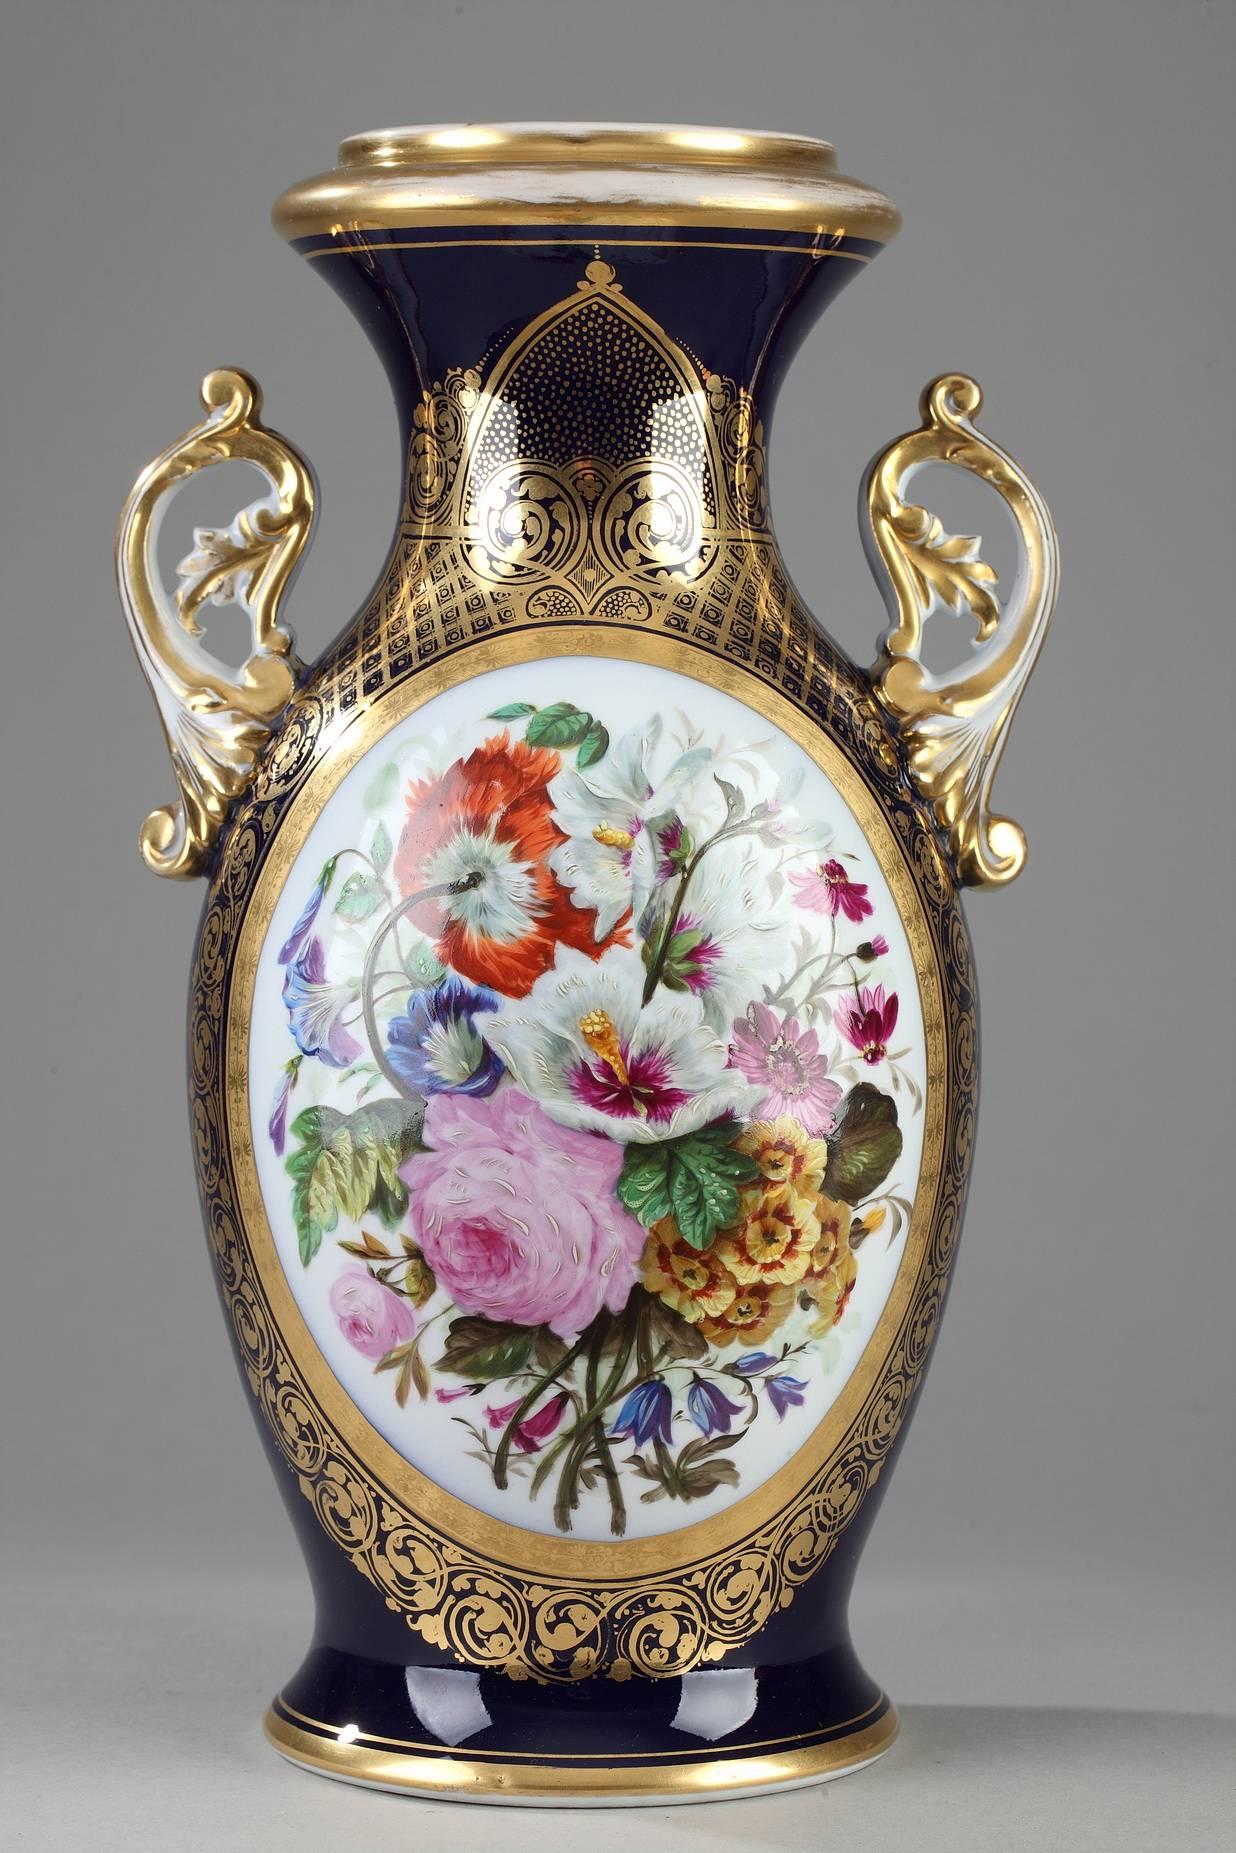 Pair of oval, porcelain vases, decorated on one side with multicolored bouquets in cartouches framed in gold. The base and the neck are accented with rinceaux, scrollwork, and a latticework pattern painted in gold on a midnight blue background. Each